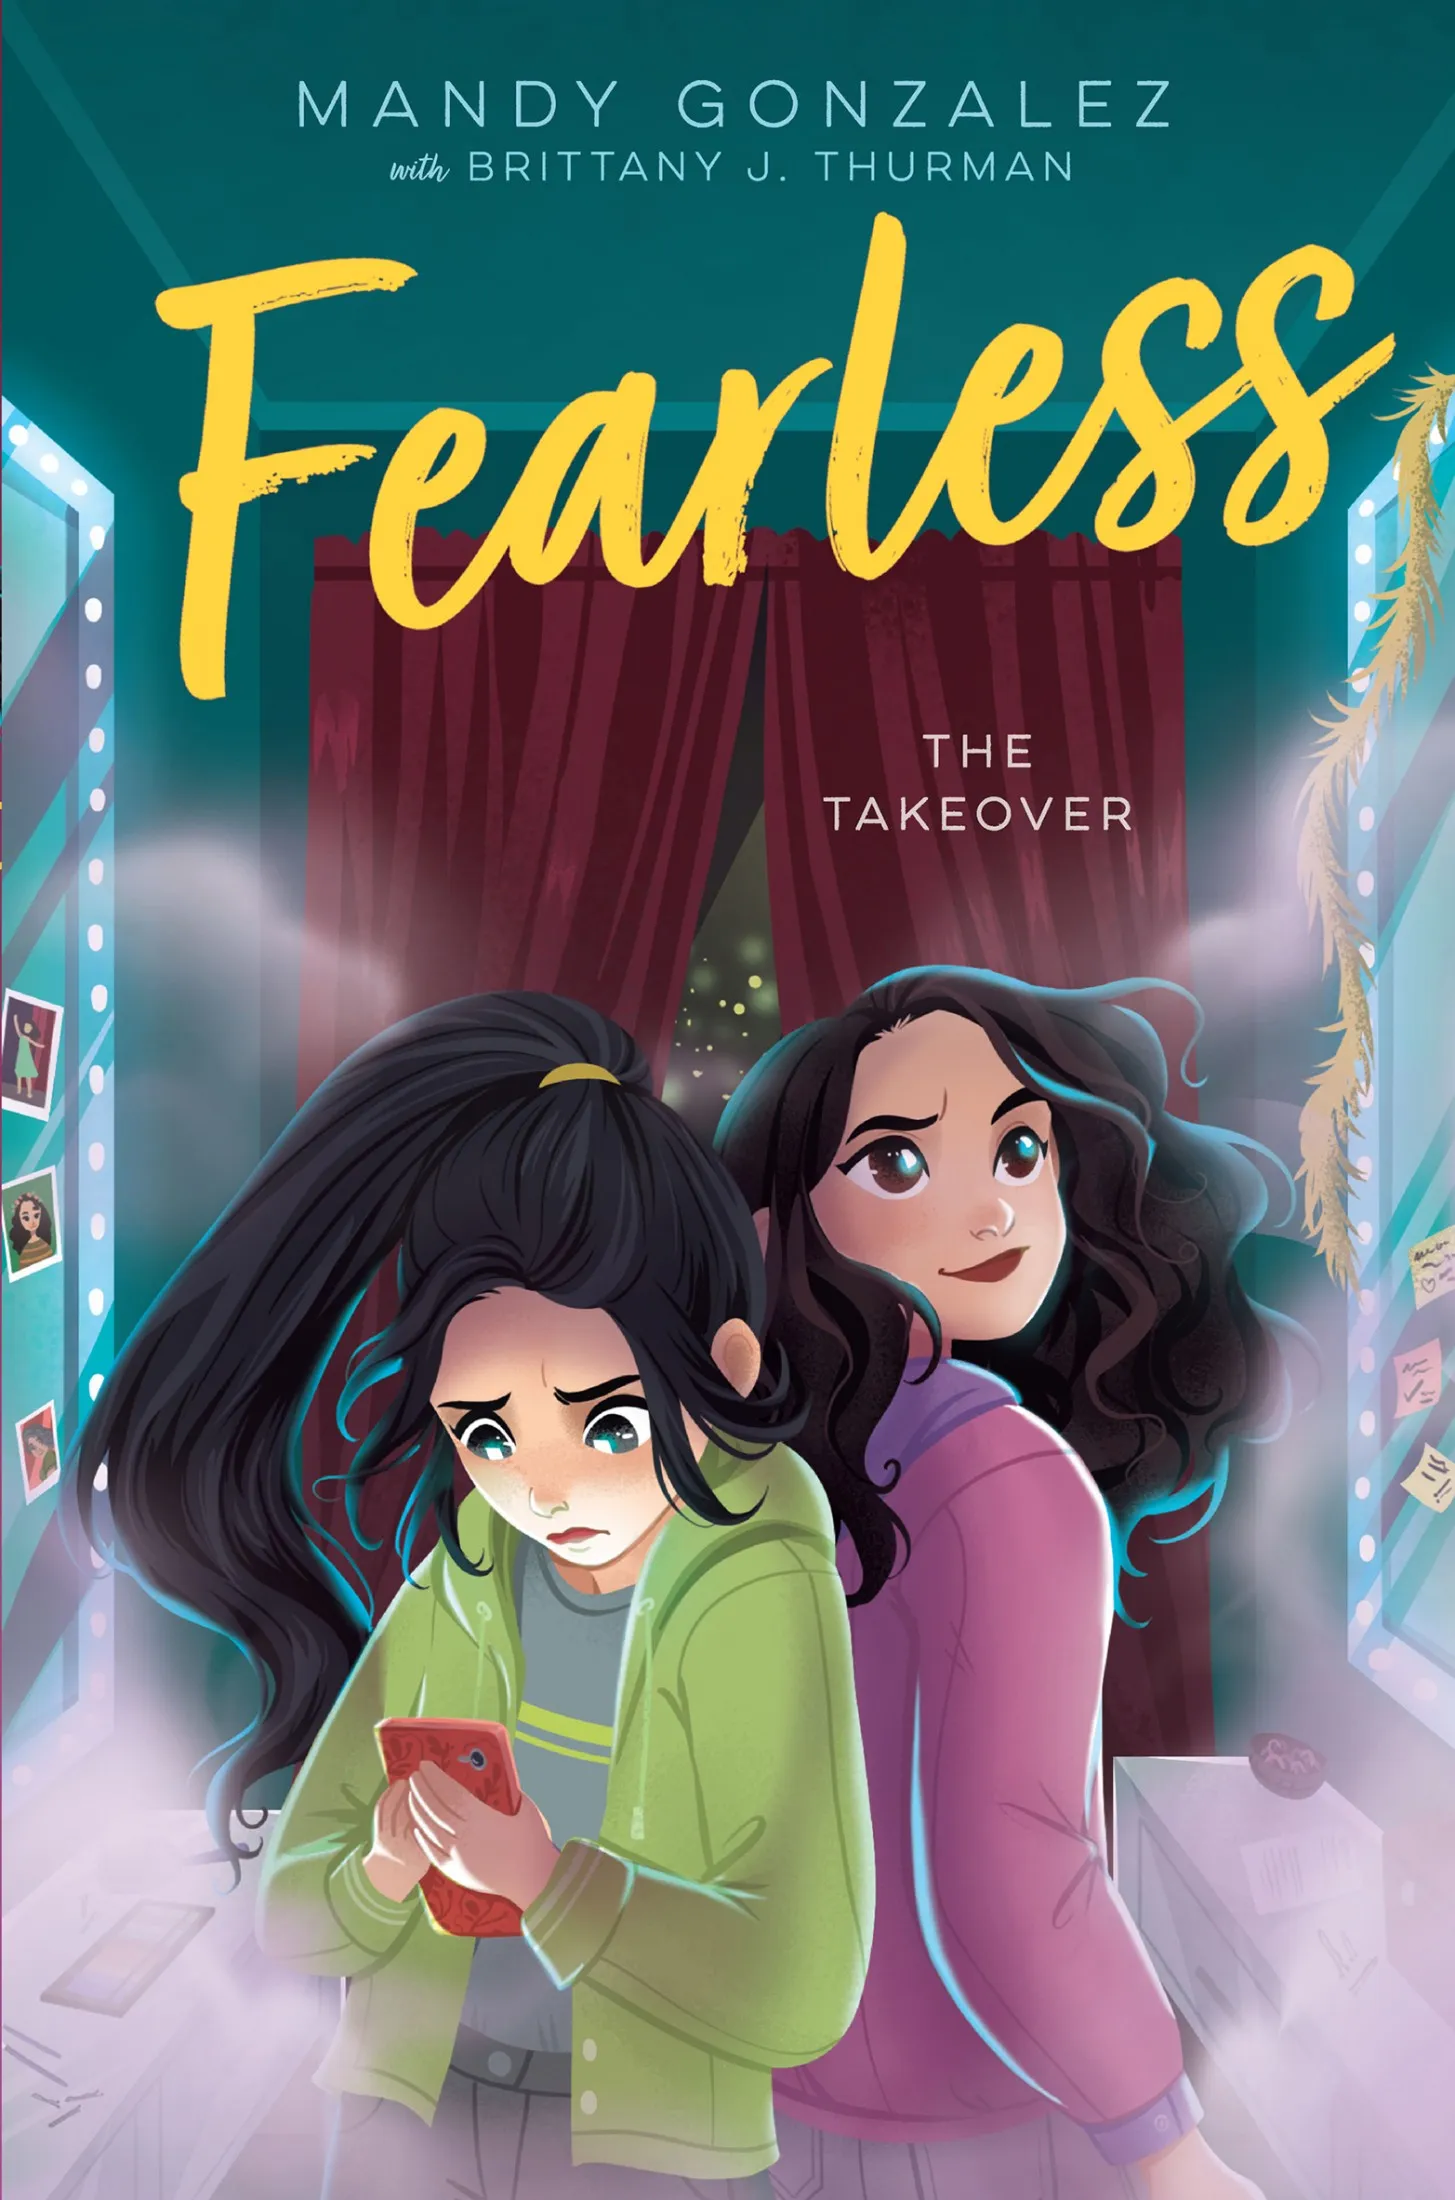 The Takeover (Fearless #4)